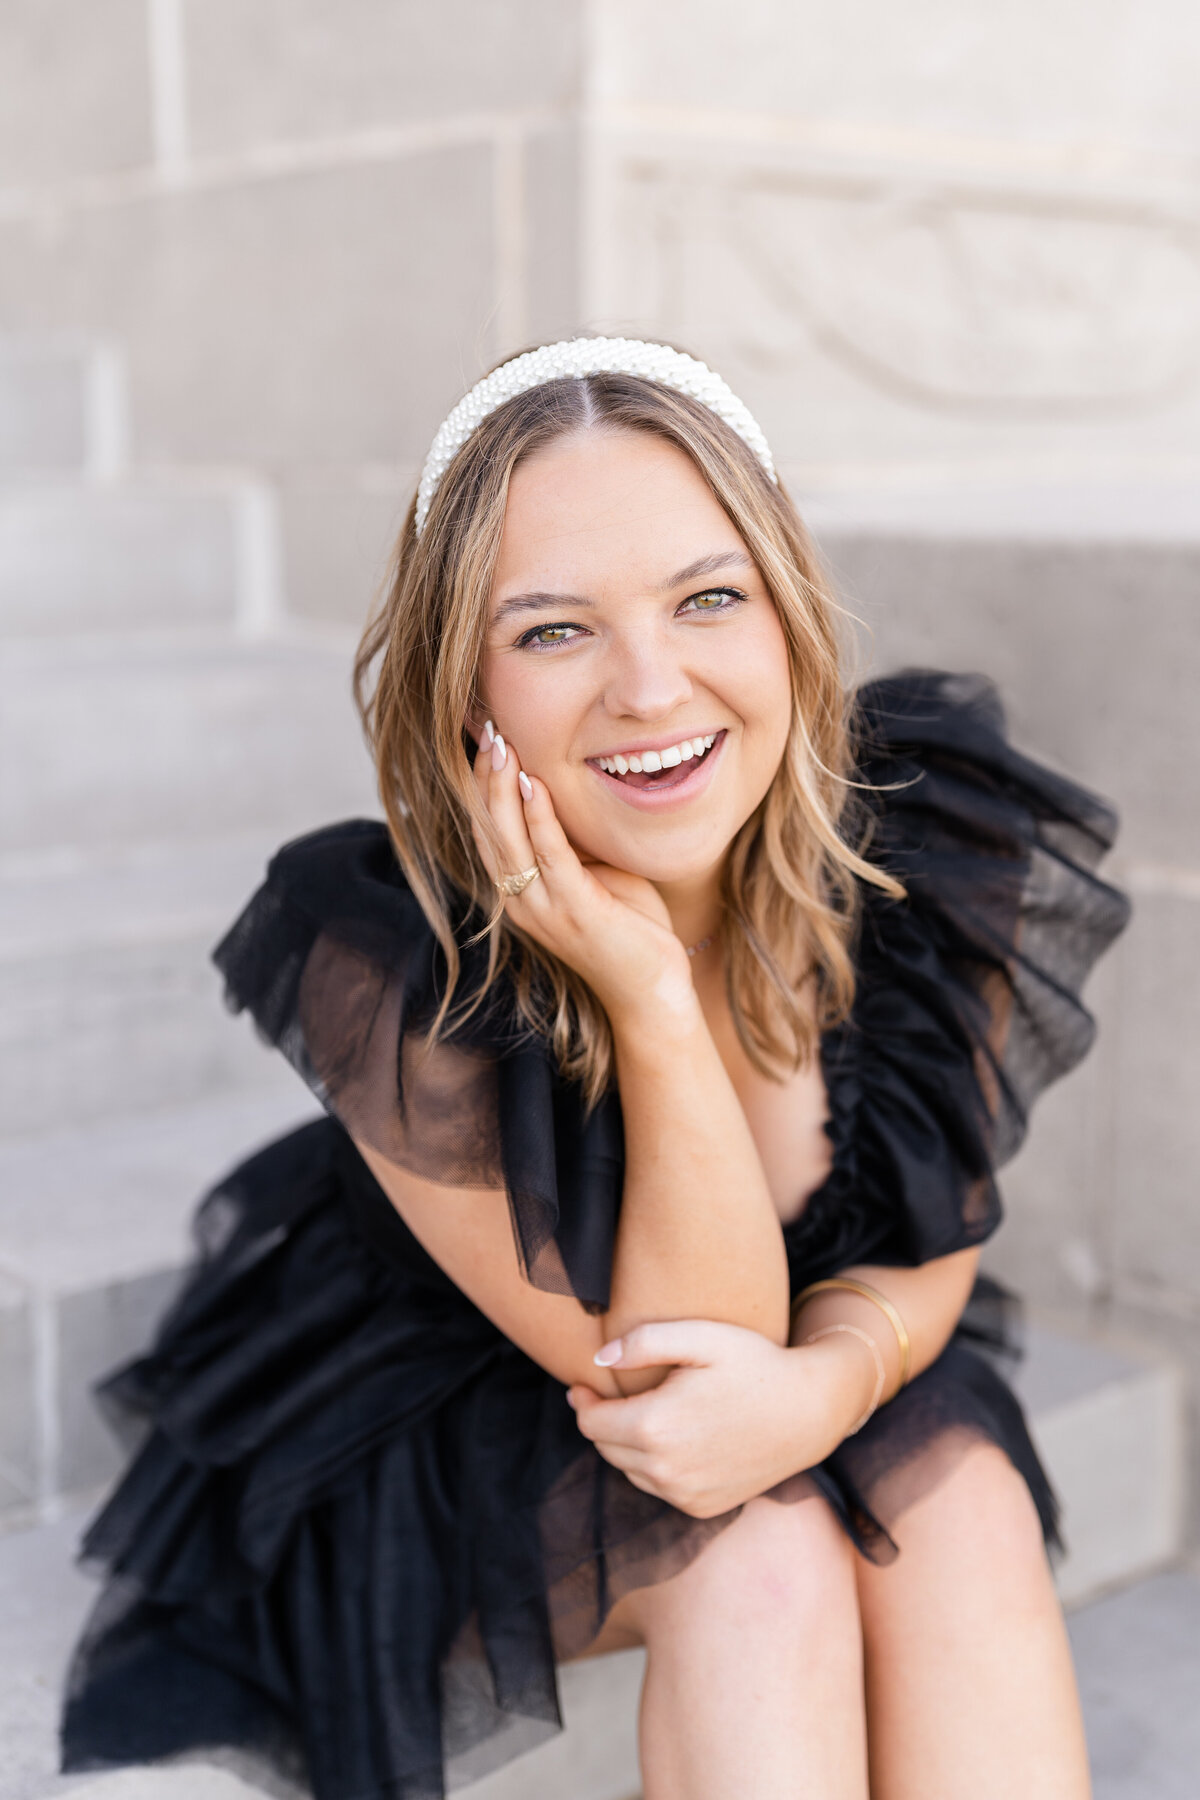 Texas A&M senior girl sitting on Administration Building stairs wearing a fluffy black dress and smiling with pearl headband and hand on cheek